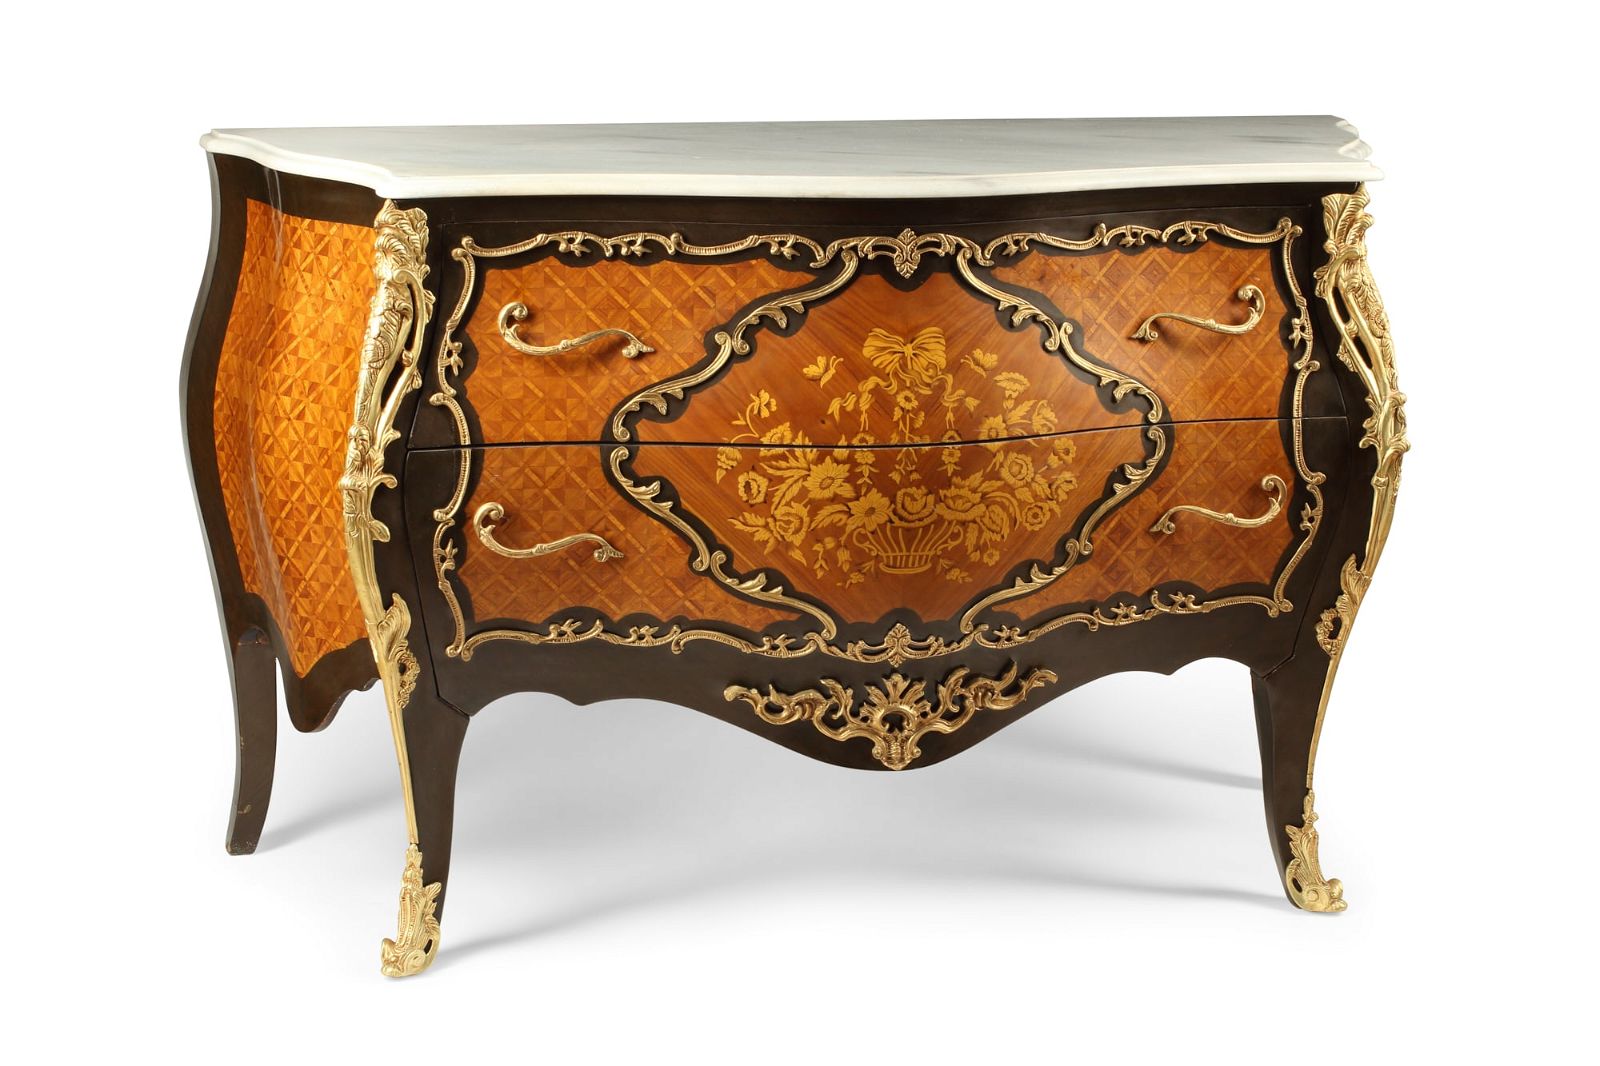 A LOUIS XV STYLE MARQUETRY COMMODEA 2fb35dd